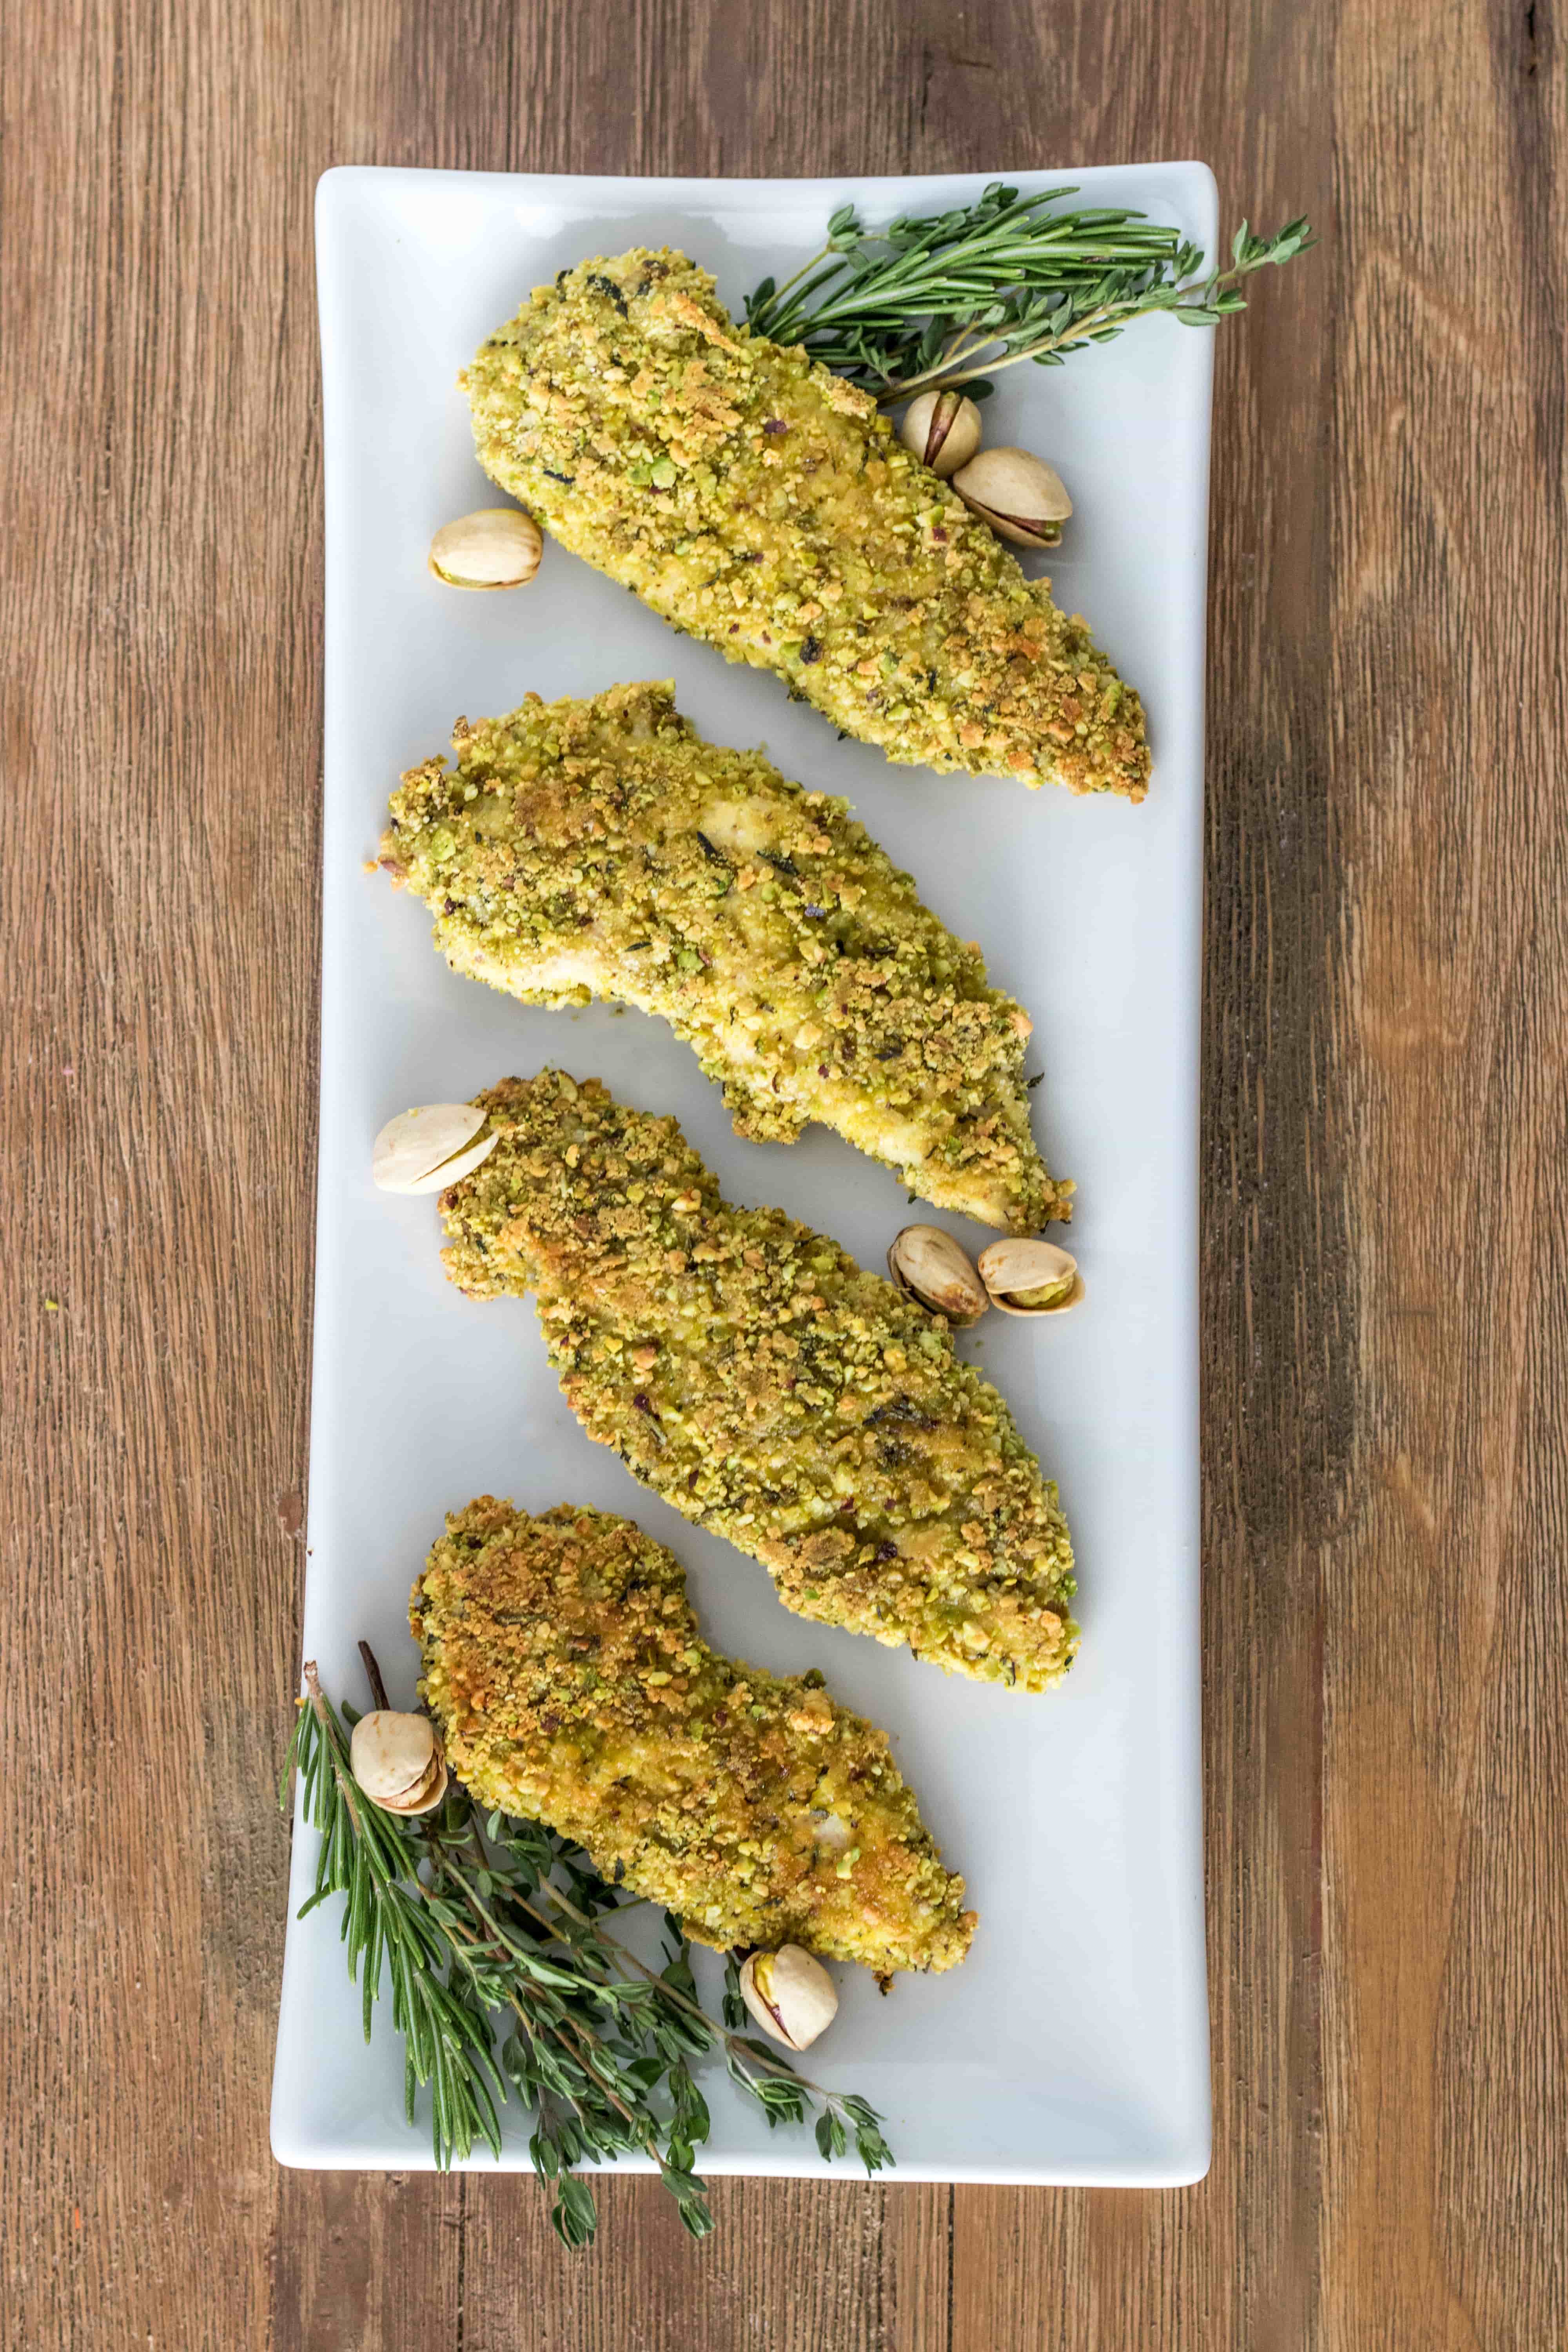 Links to Wonderful Pistachios Coconut-Crusted Chicken recipe